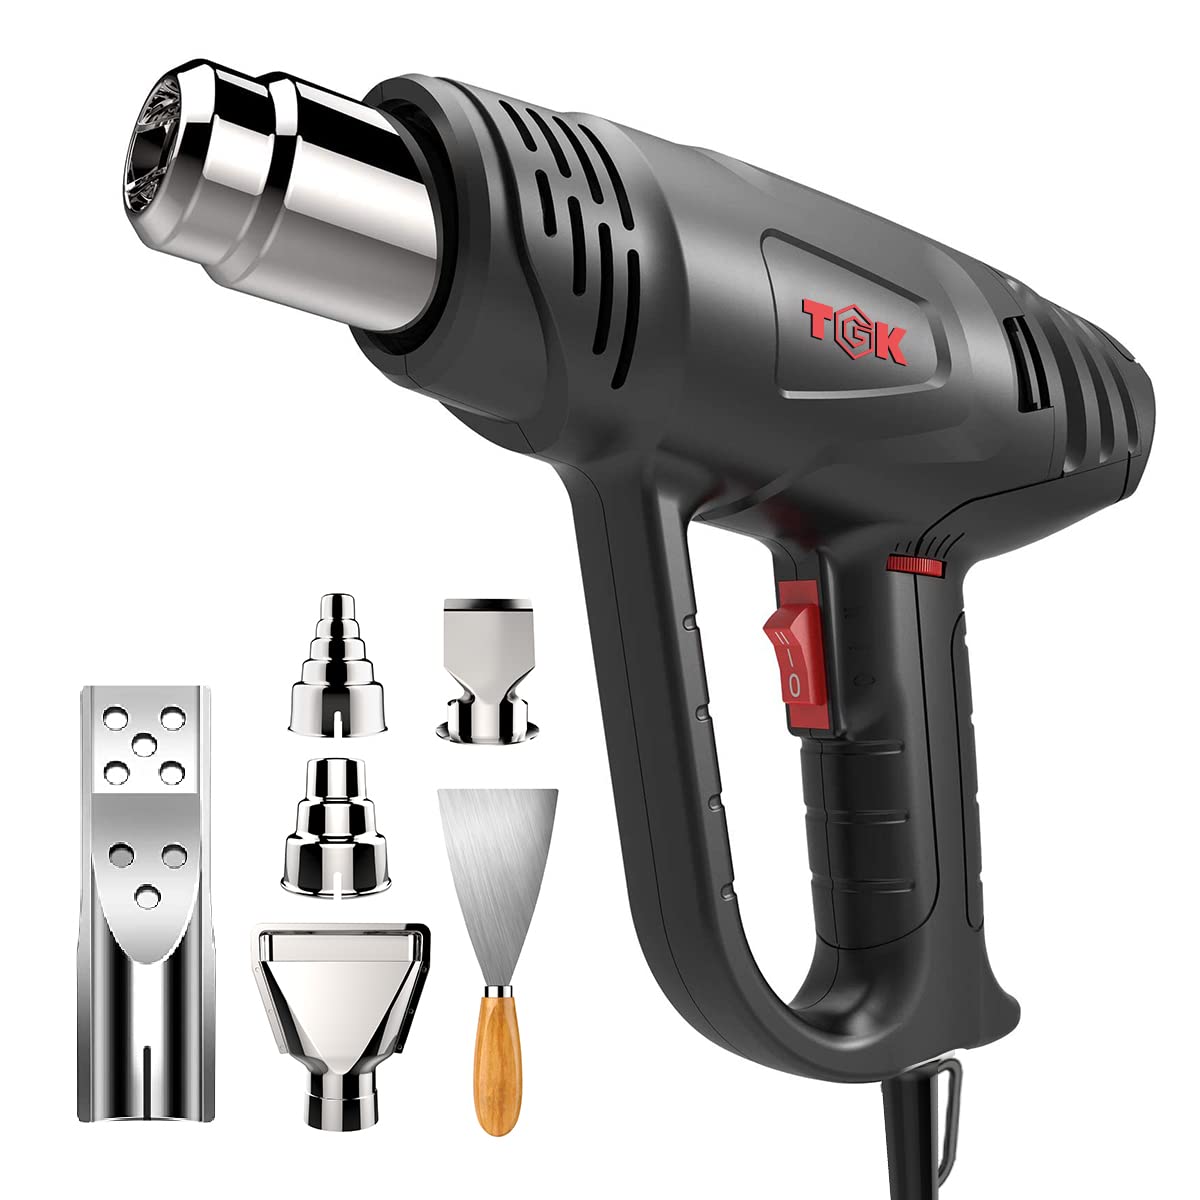 Lowest Price for Hot Air Torch Plastic Welding Gun - Heat Gun, TGK 1800W Heavy Duty Hot Air Gun Kit 122℉~1202℉ Dual Temperature Settings with 6 Nozzle Attachments Overload Protection for Crafts, S...